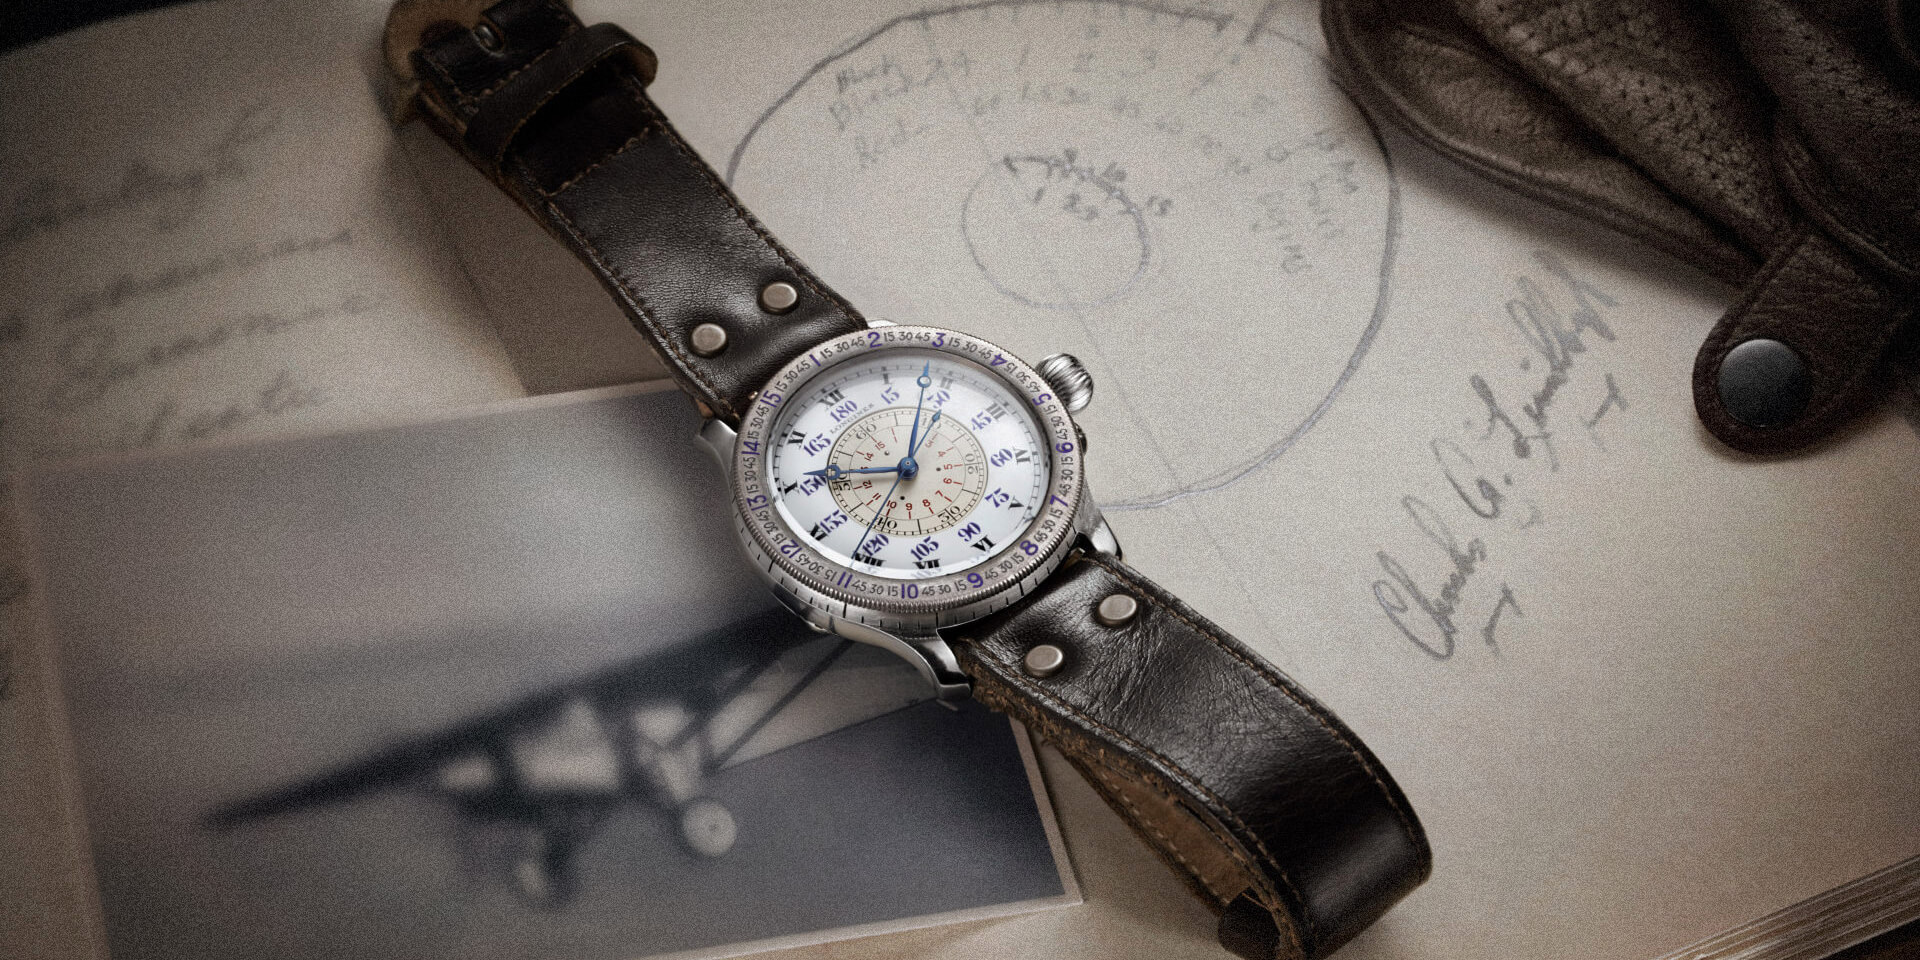 6 Myths and Misconceptions about Longines